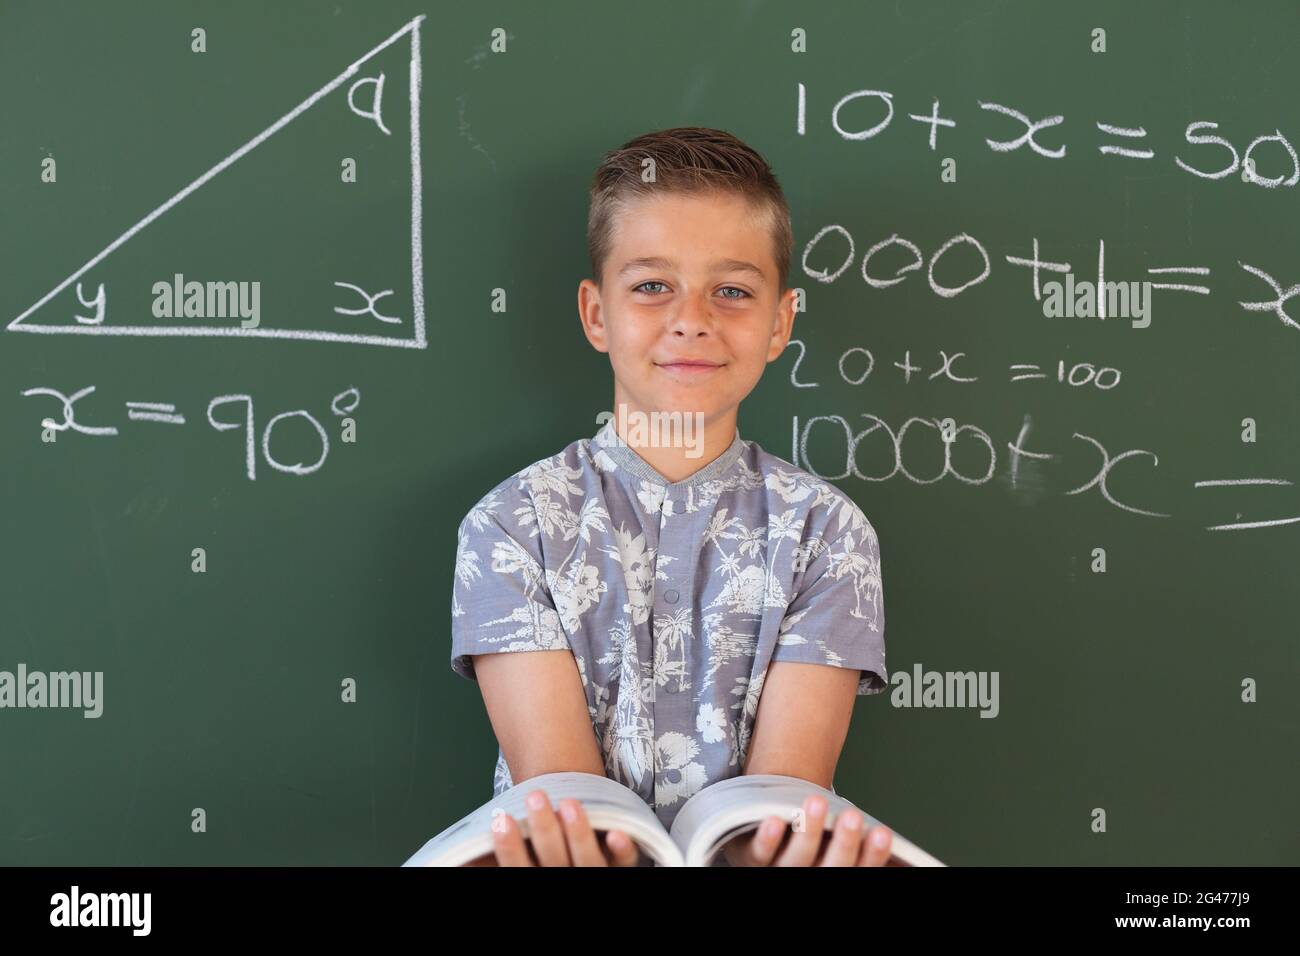 Portrait of happy caucasian boy standing at chalkboard in maths lesson classroom holding schoolbook Stock Photo